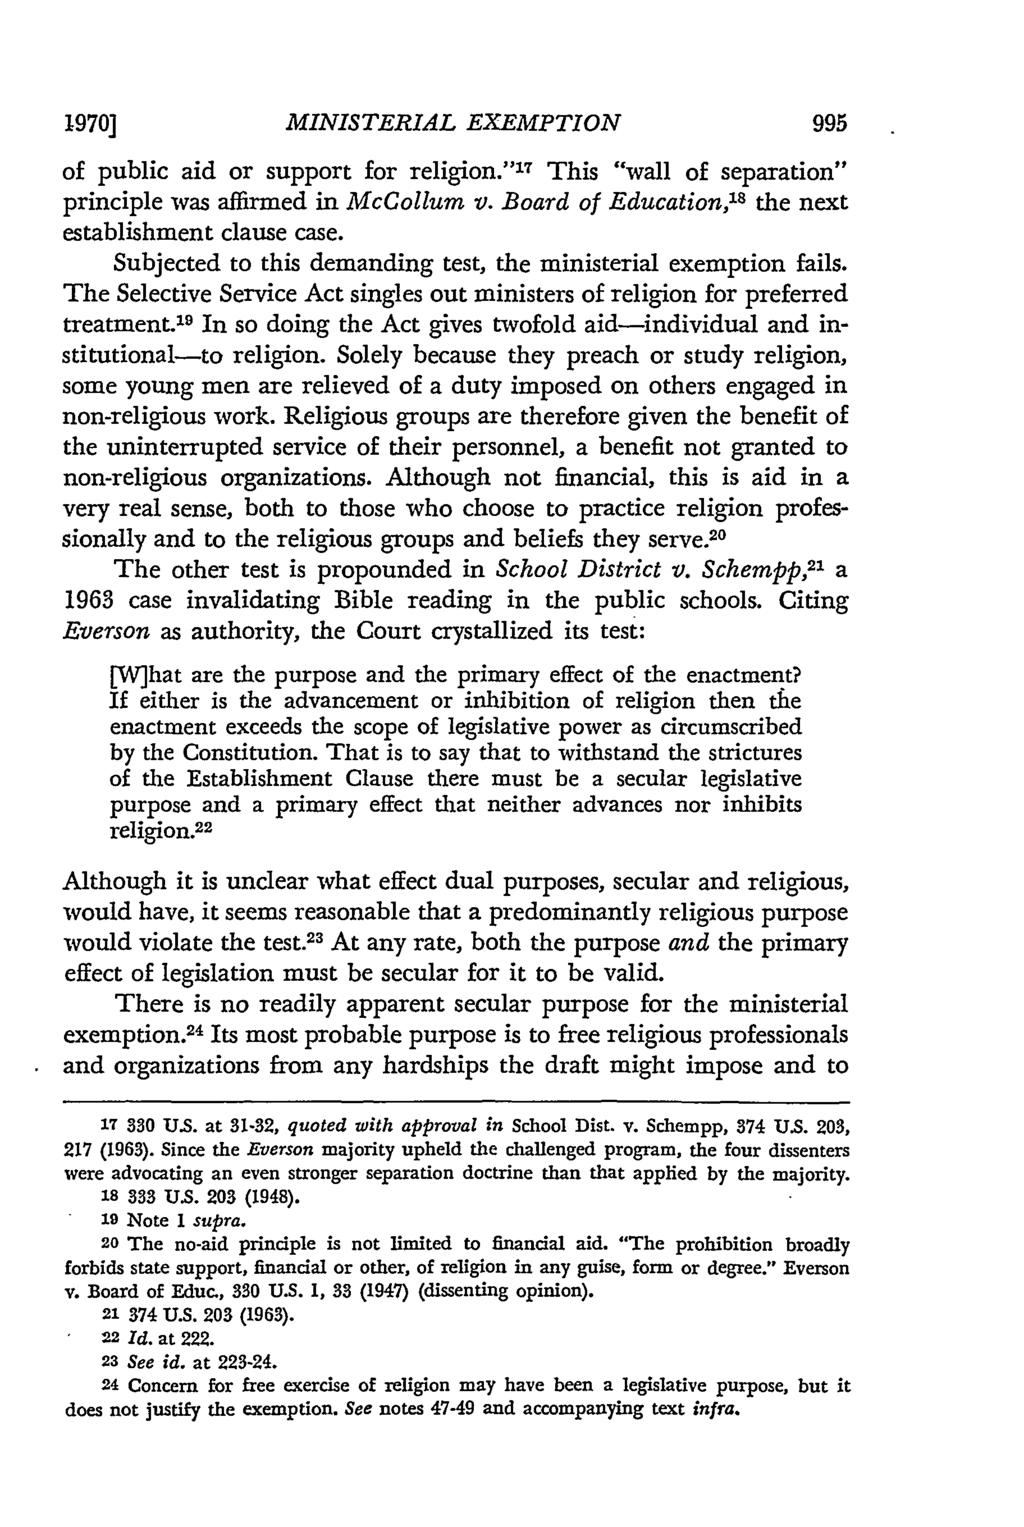 1970] MINISTERIAL EXEMPTION of public aid or support for religion." 17 This "wall of separation" principle was affirmed in McCollum v. Board of Education,' the next establishment clause case.